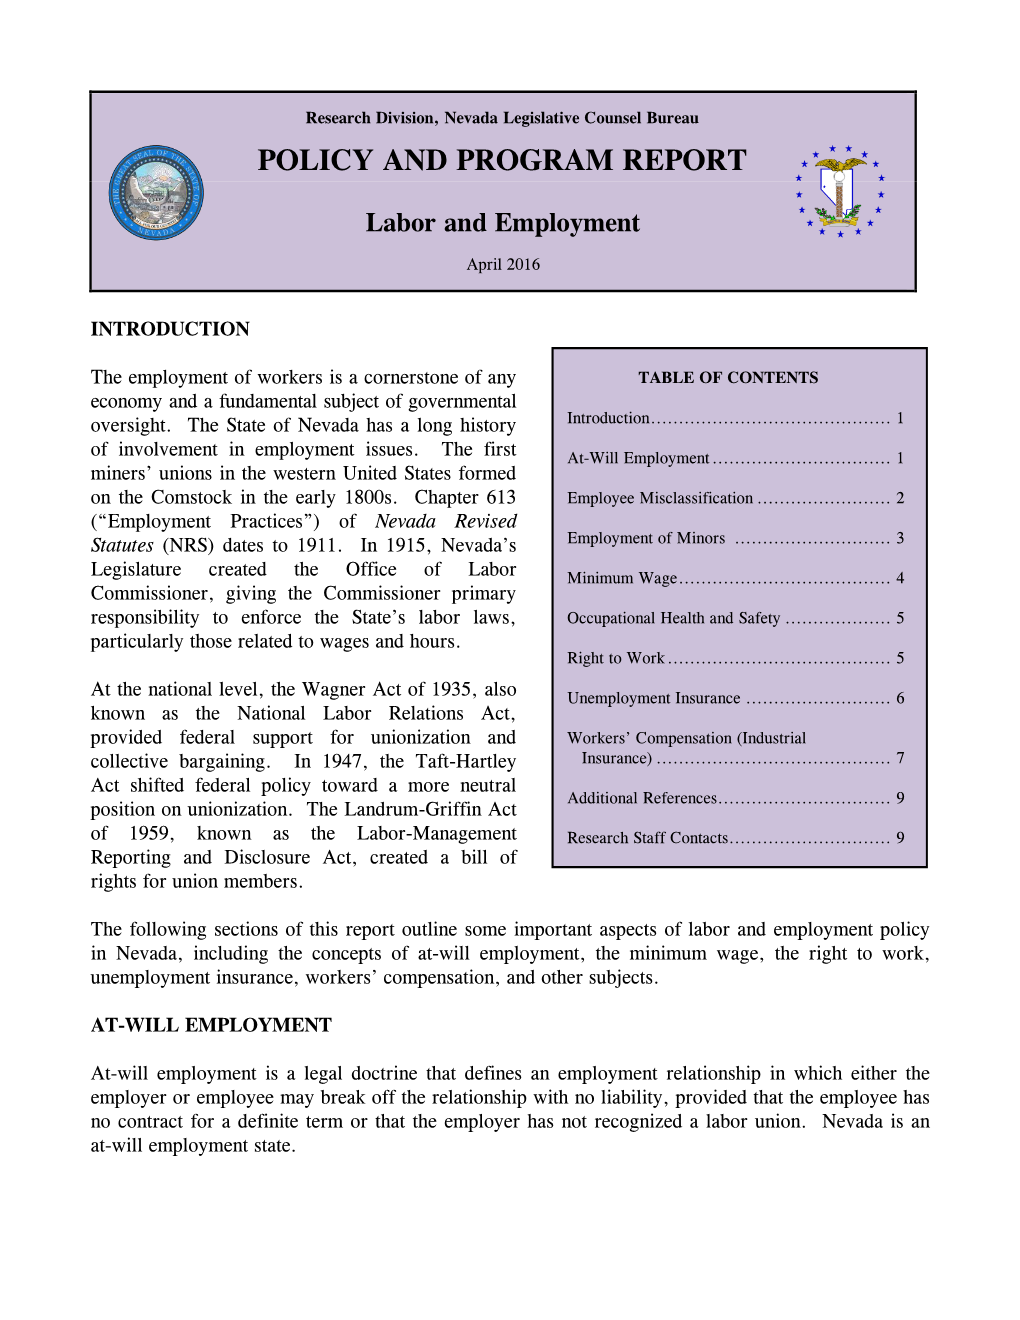 POLICY and PROGRAM REPORT Labor and Employment